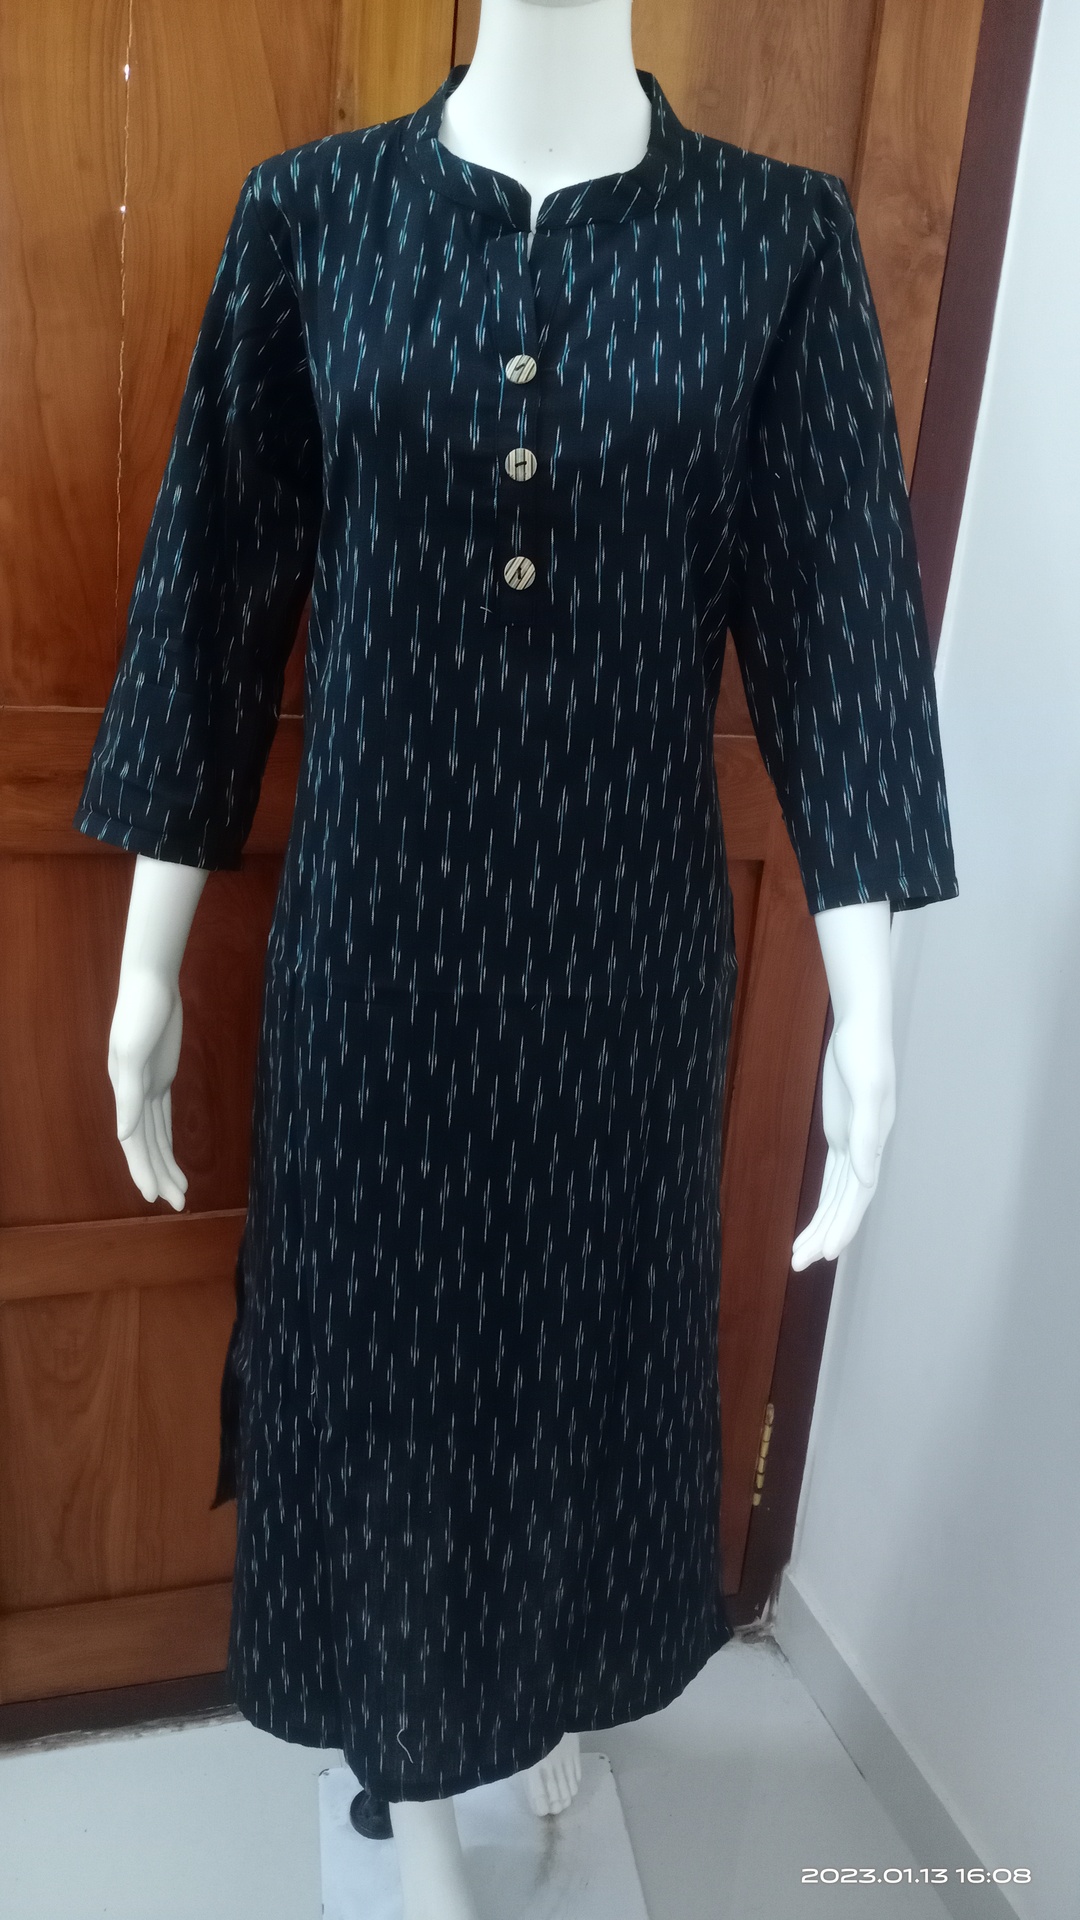 Black Ikkat Kurti with small blue white lines.